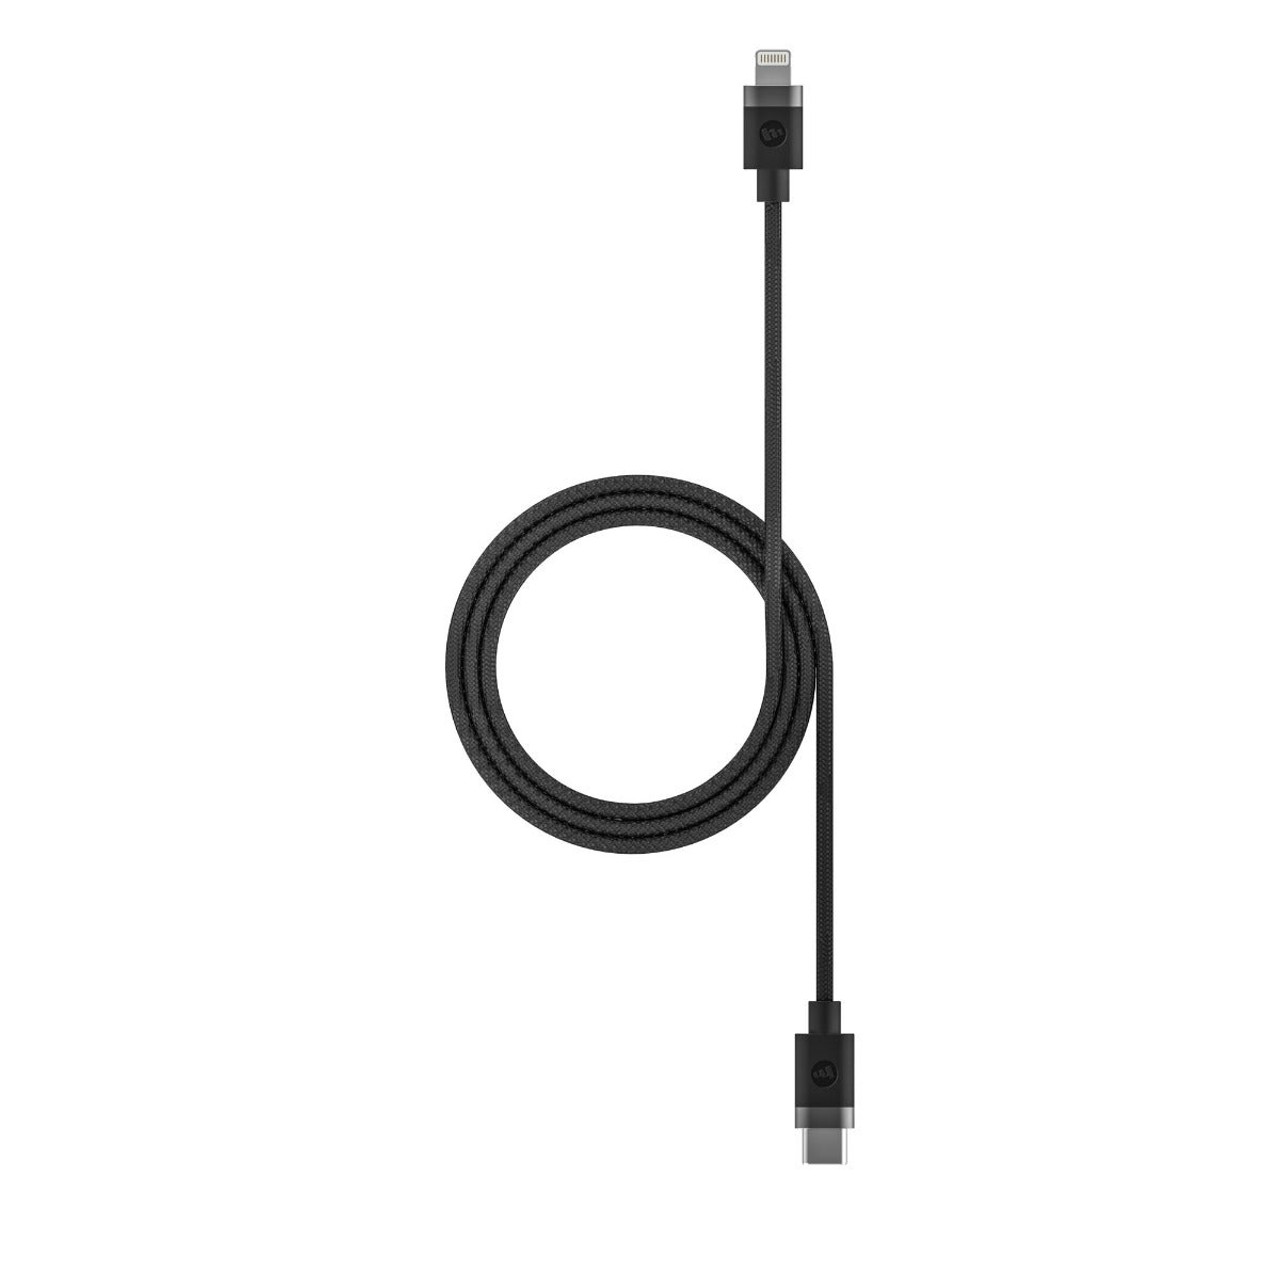 mophie USB-C Cable with USB-C Connector (3m) - Apple (UK)